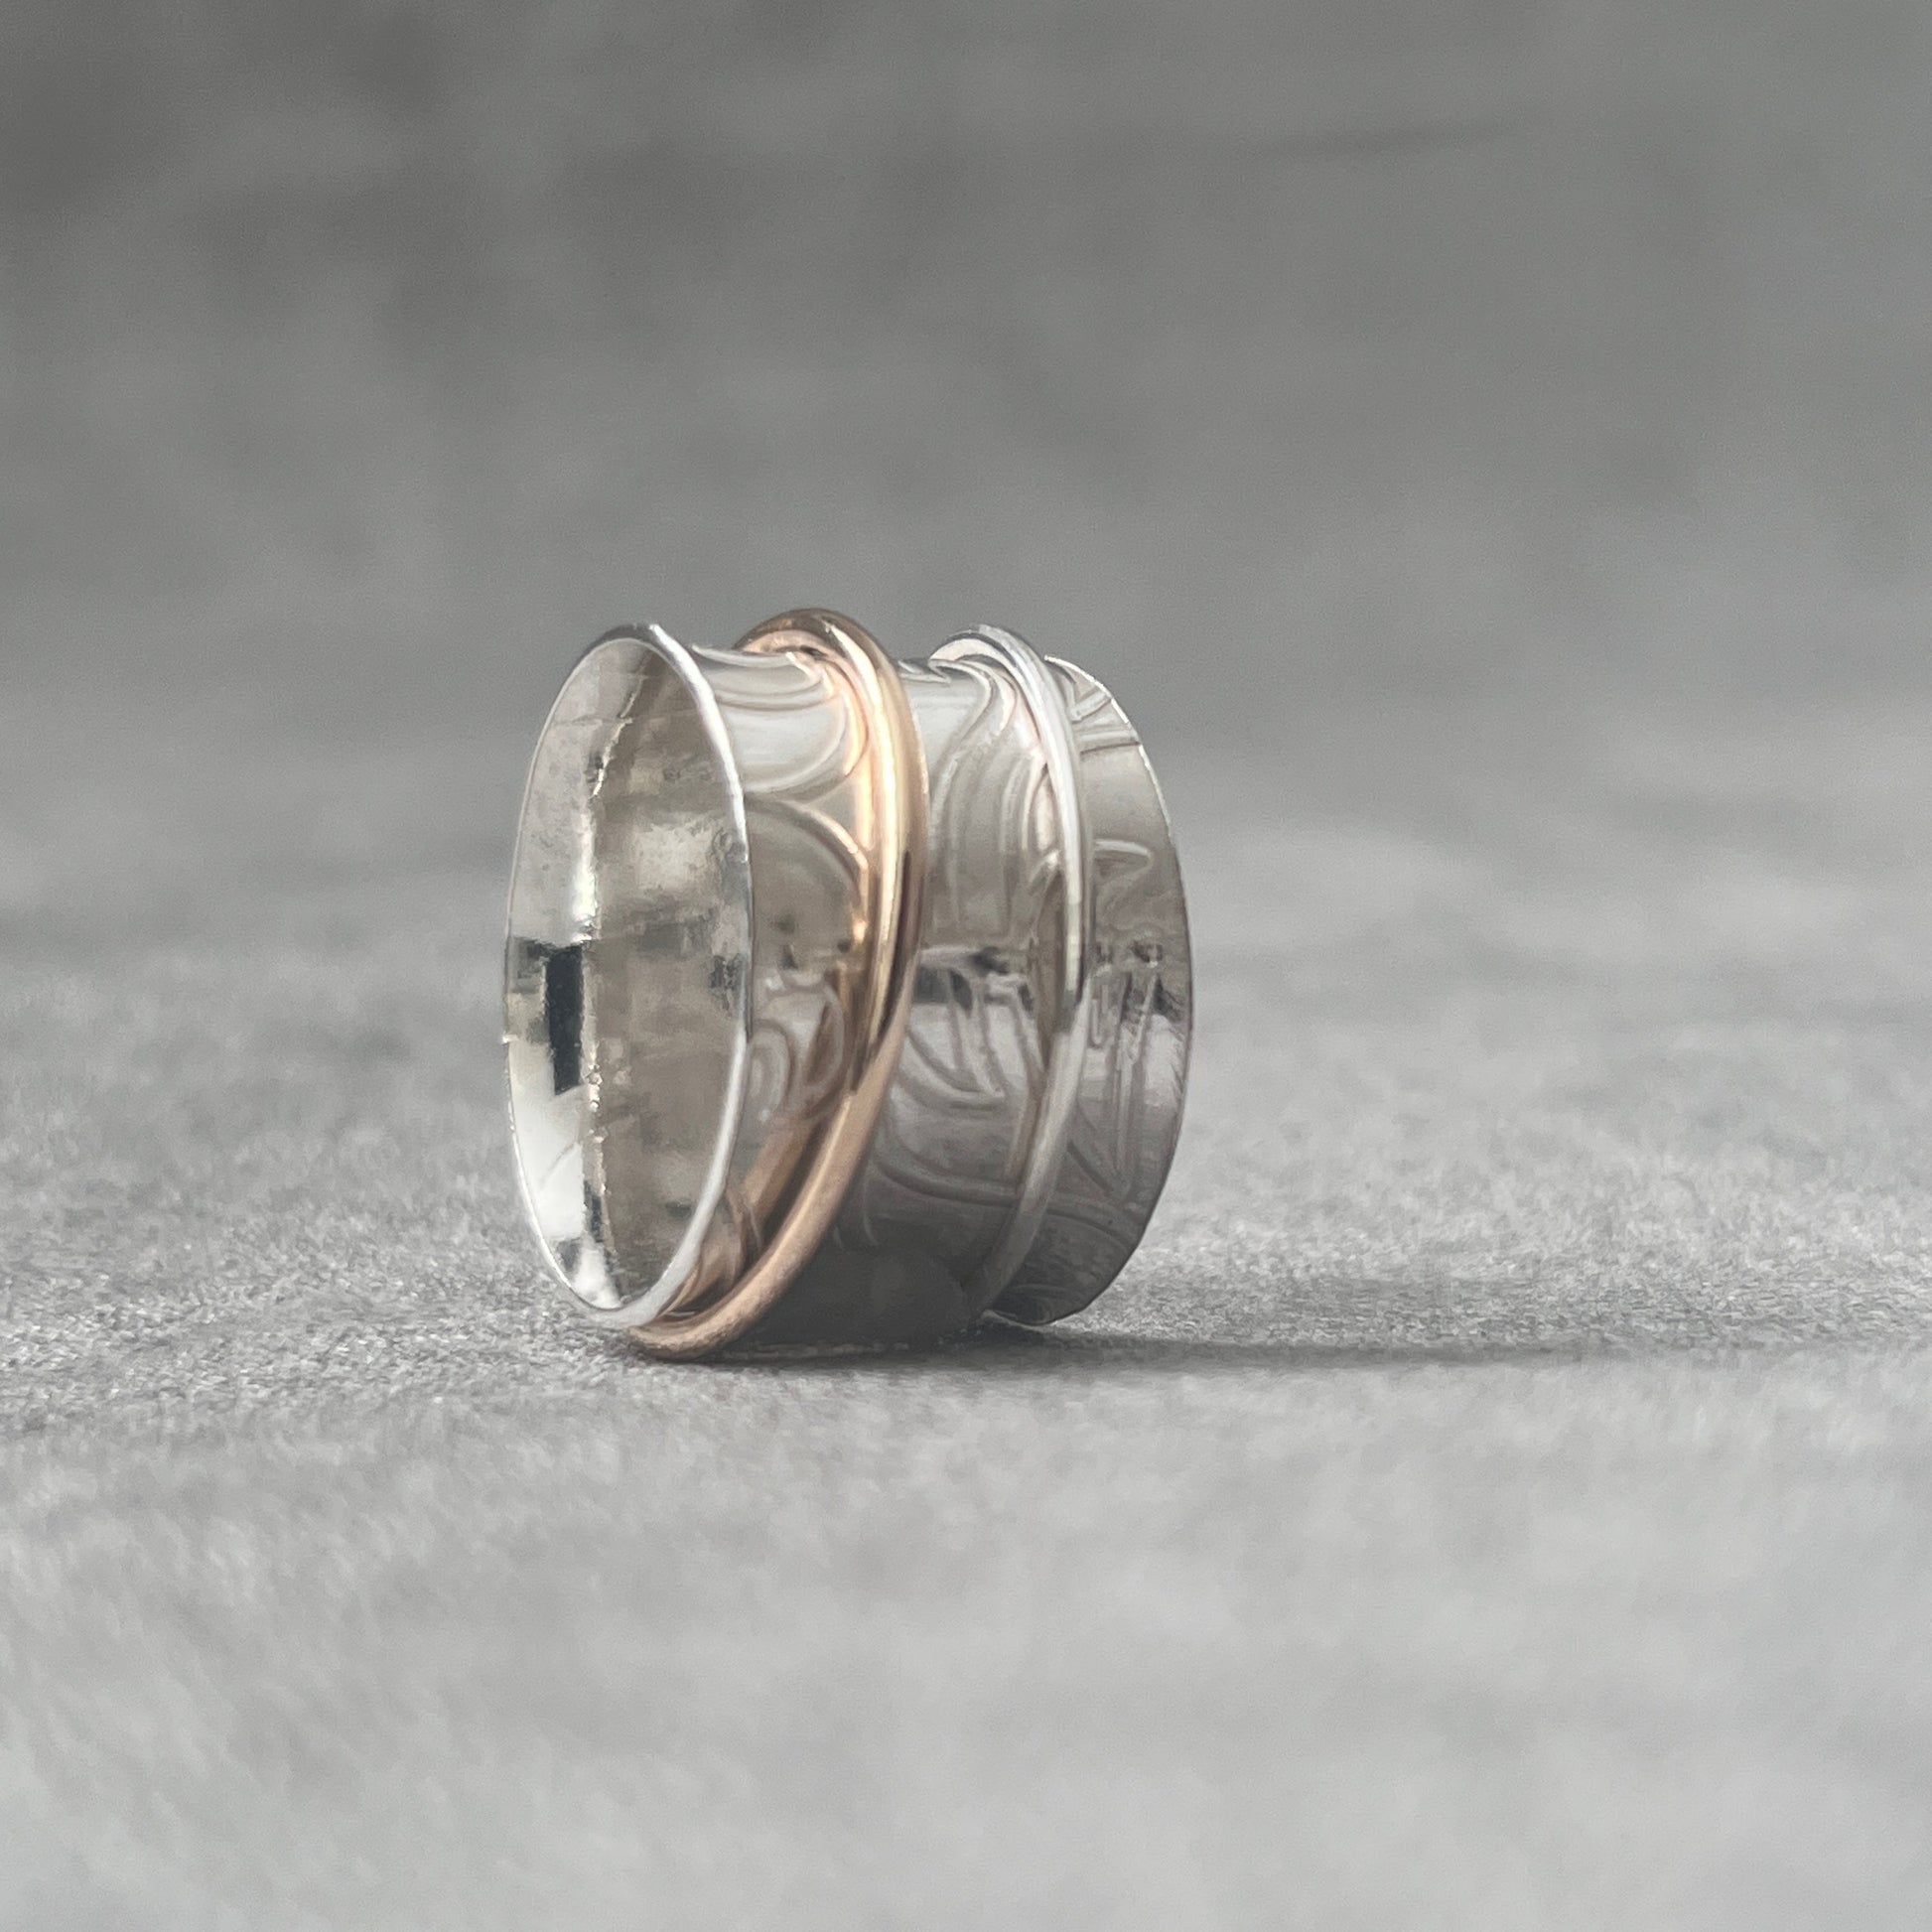 stg silver spinner ring one thick band 11mm wide with . Over it spins a silver beaded thin ring 1.5mm wide. Leafy imprinted pattern hand embellished surface on main ring, two spinner rings on the outer surface one silver one gold filledThe outer ring spins with your touch